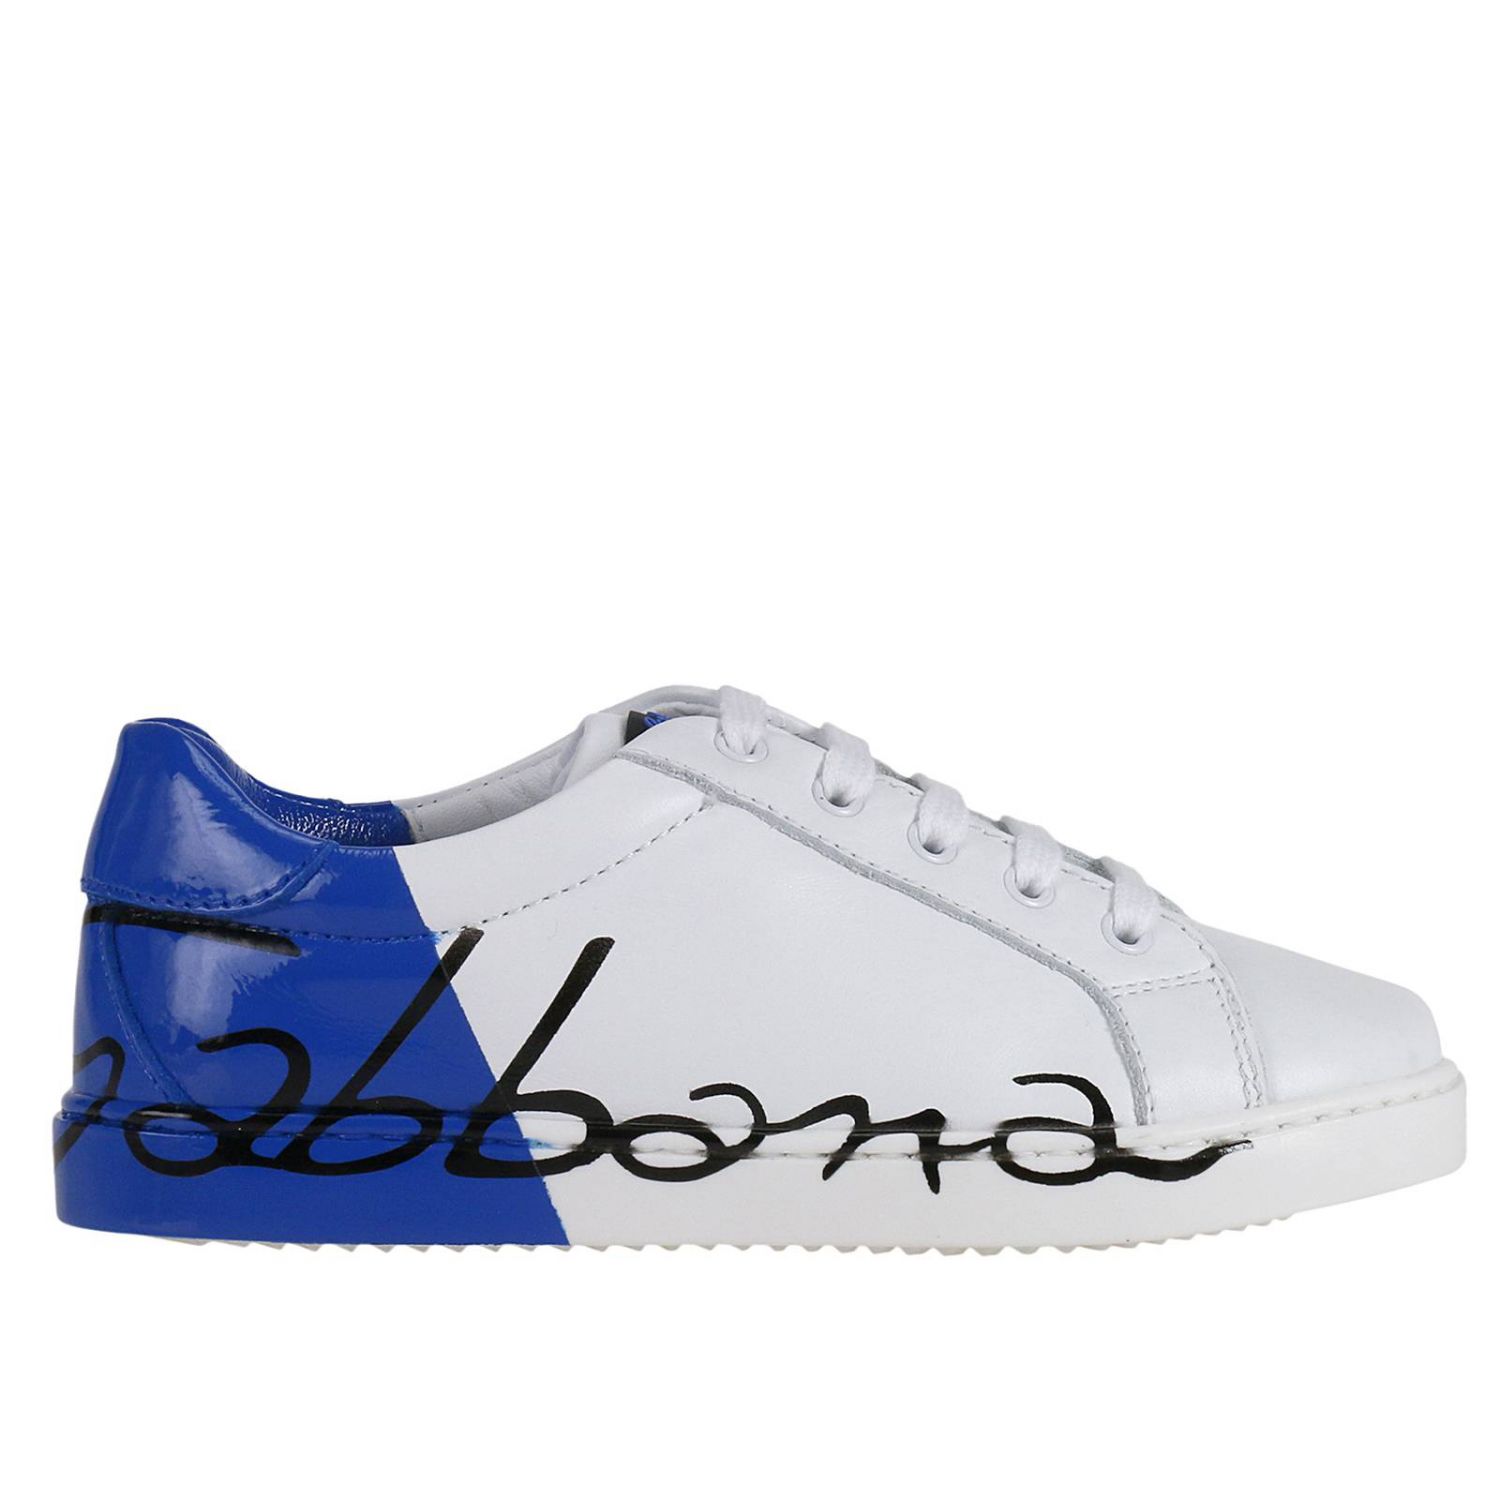 dolce and gabbana junior shoes